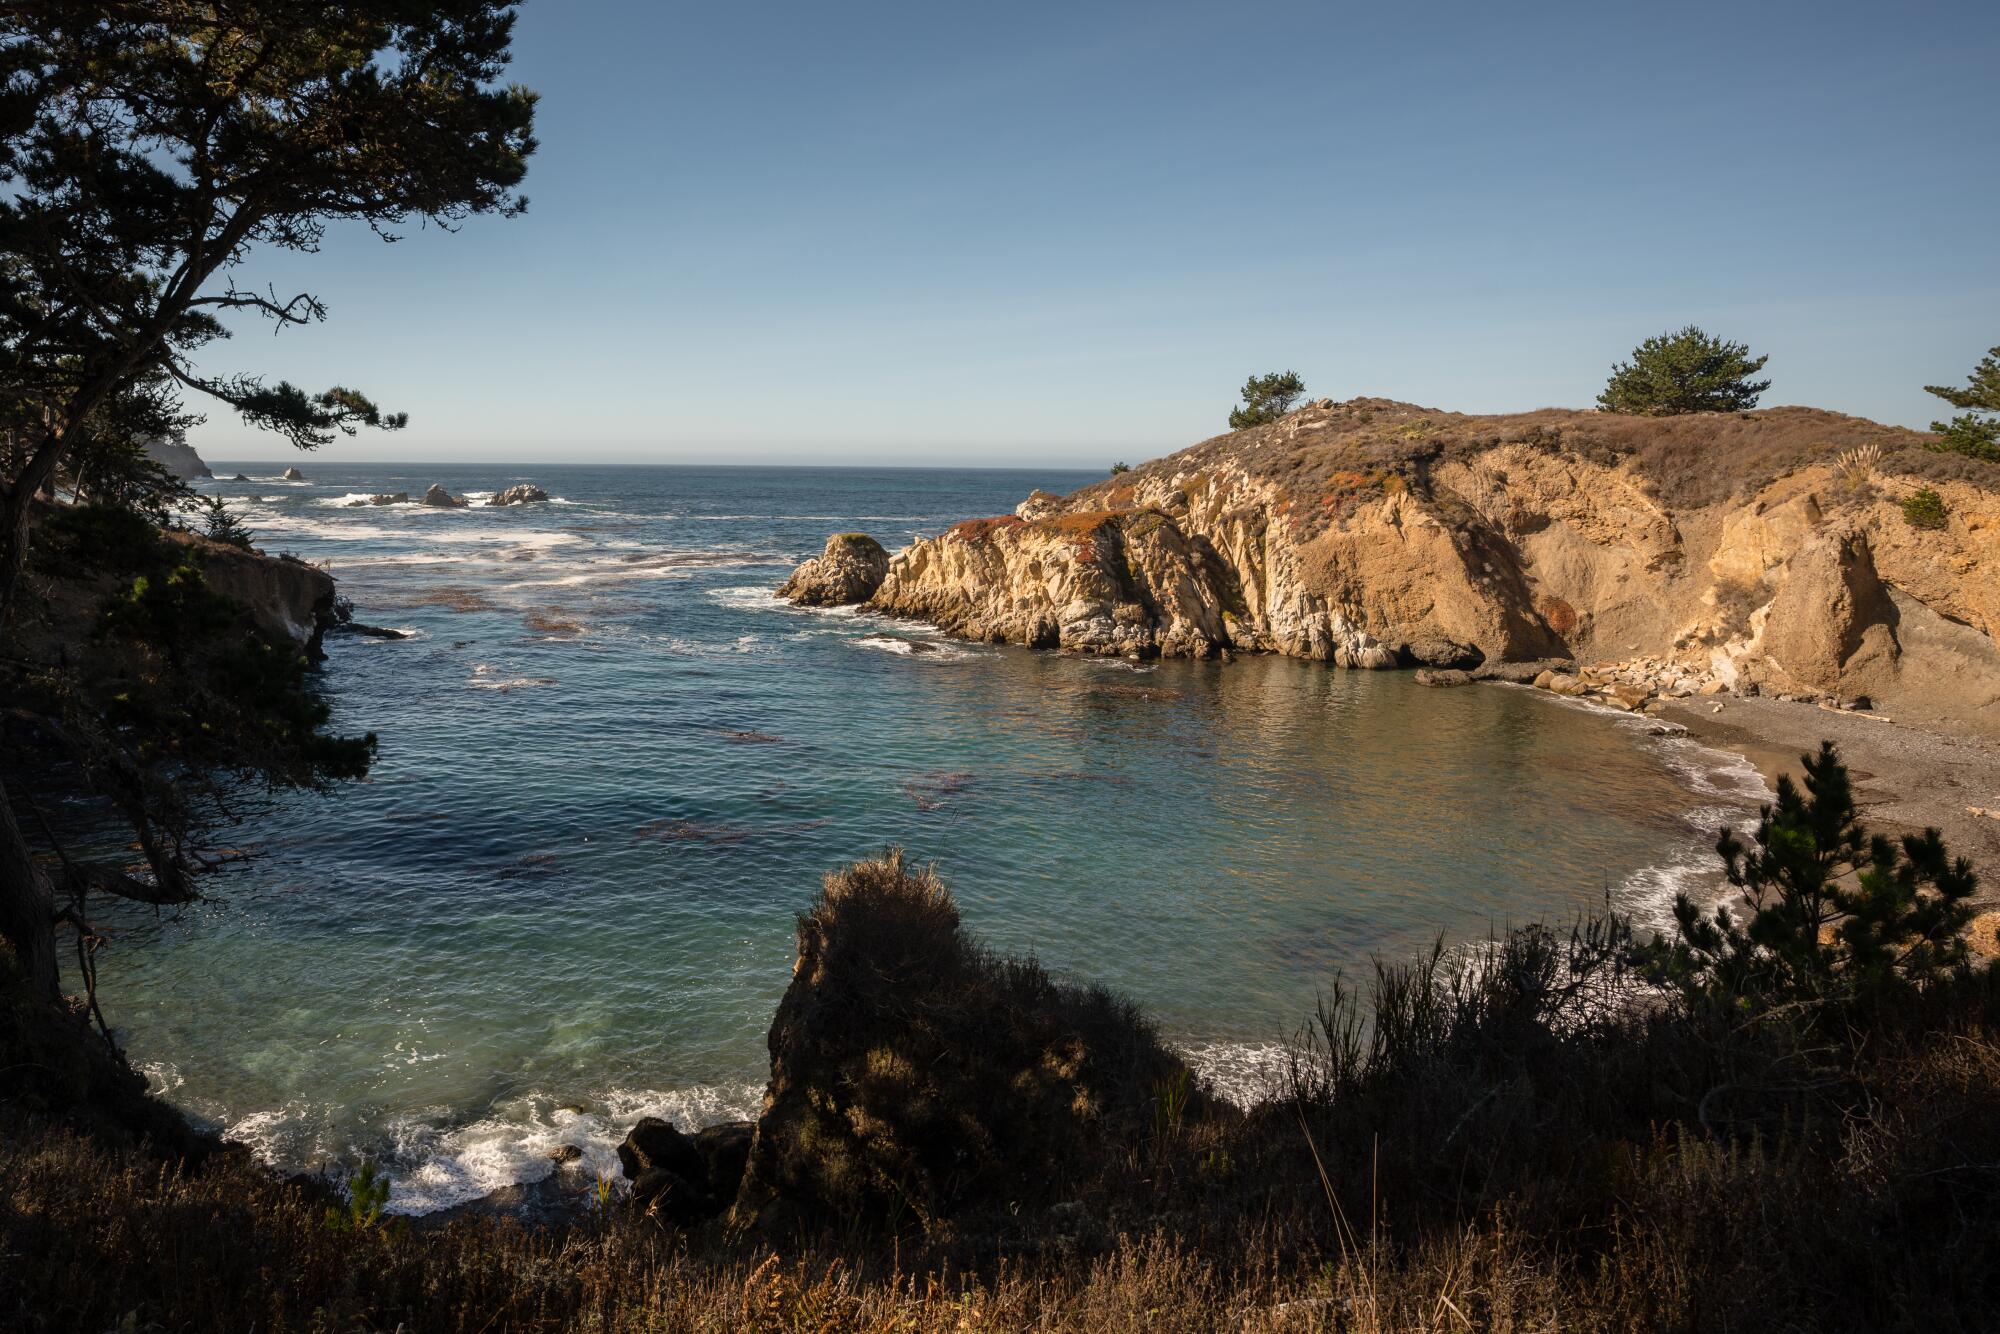 View of the coastline at Point Lobos State Reserve